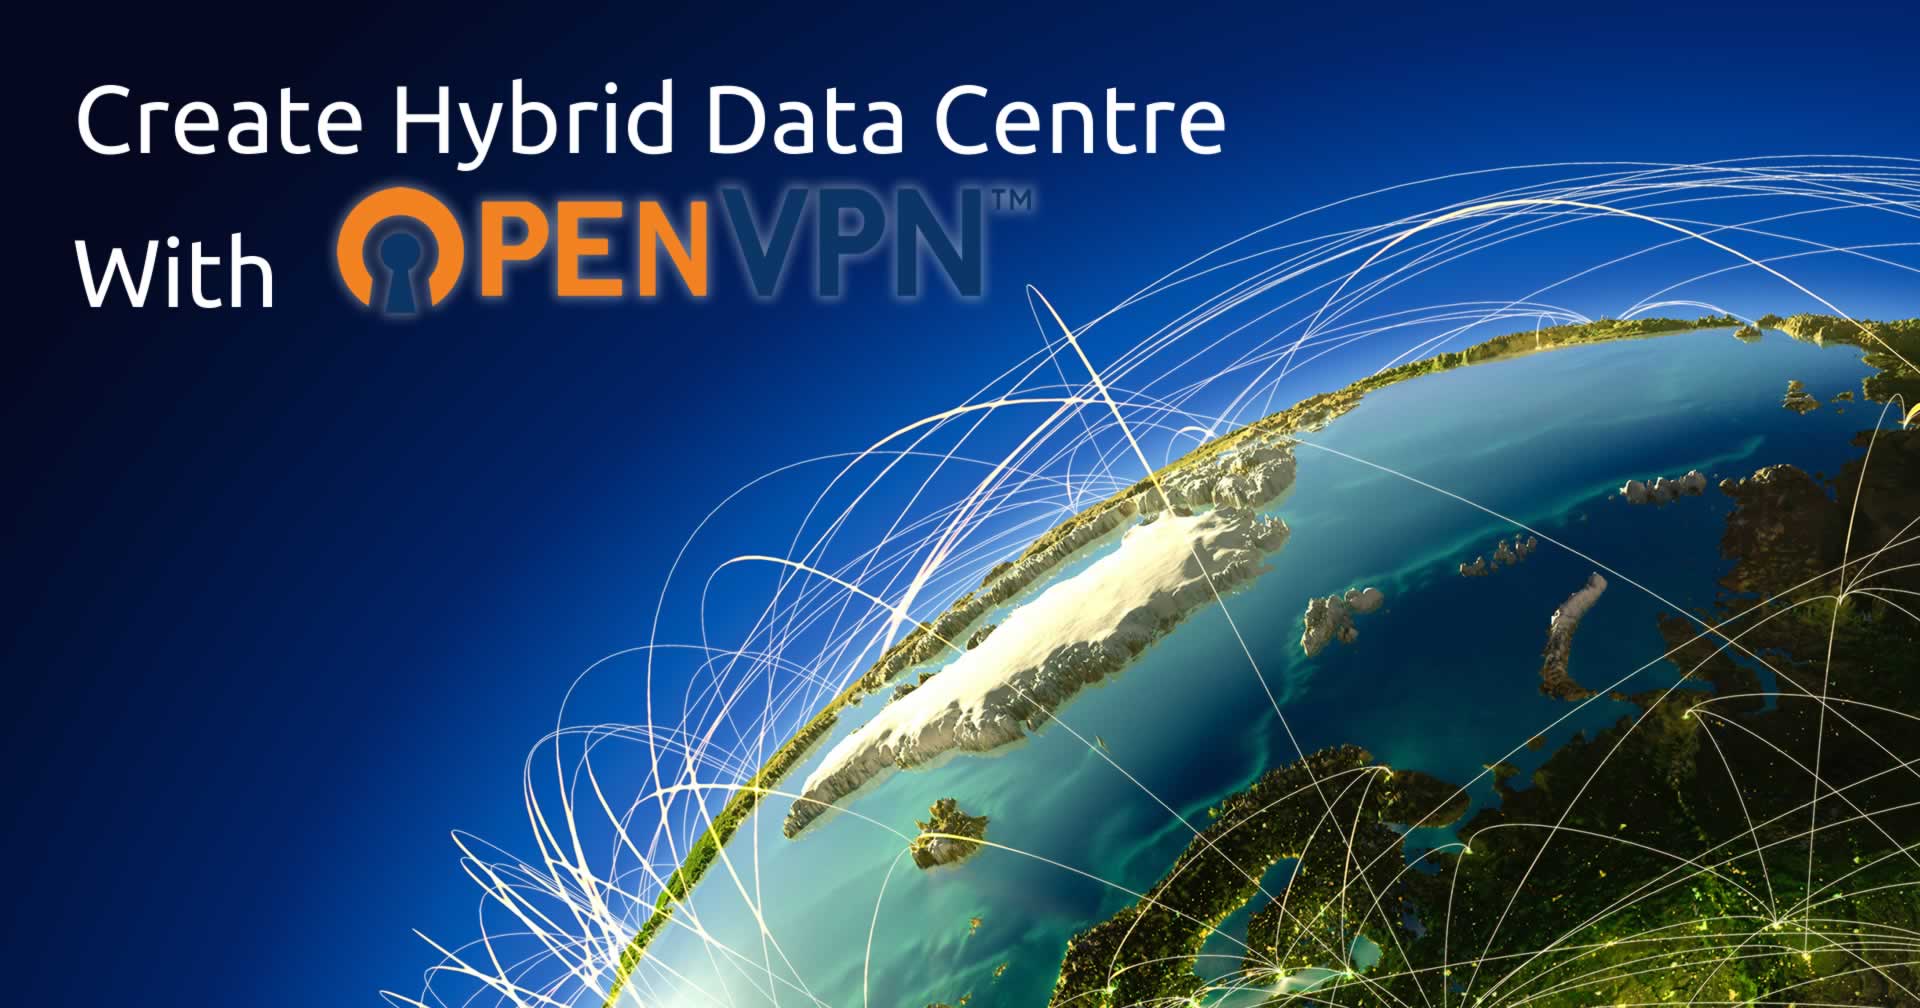 Creating a Hybrid Data Centre with OpenVPN